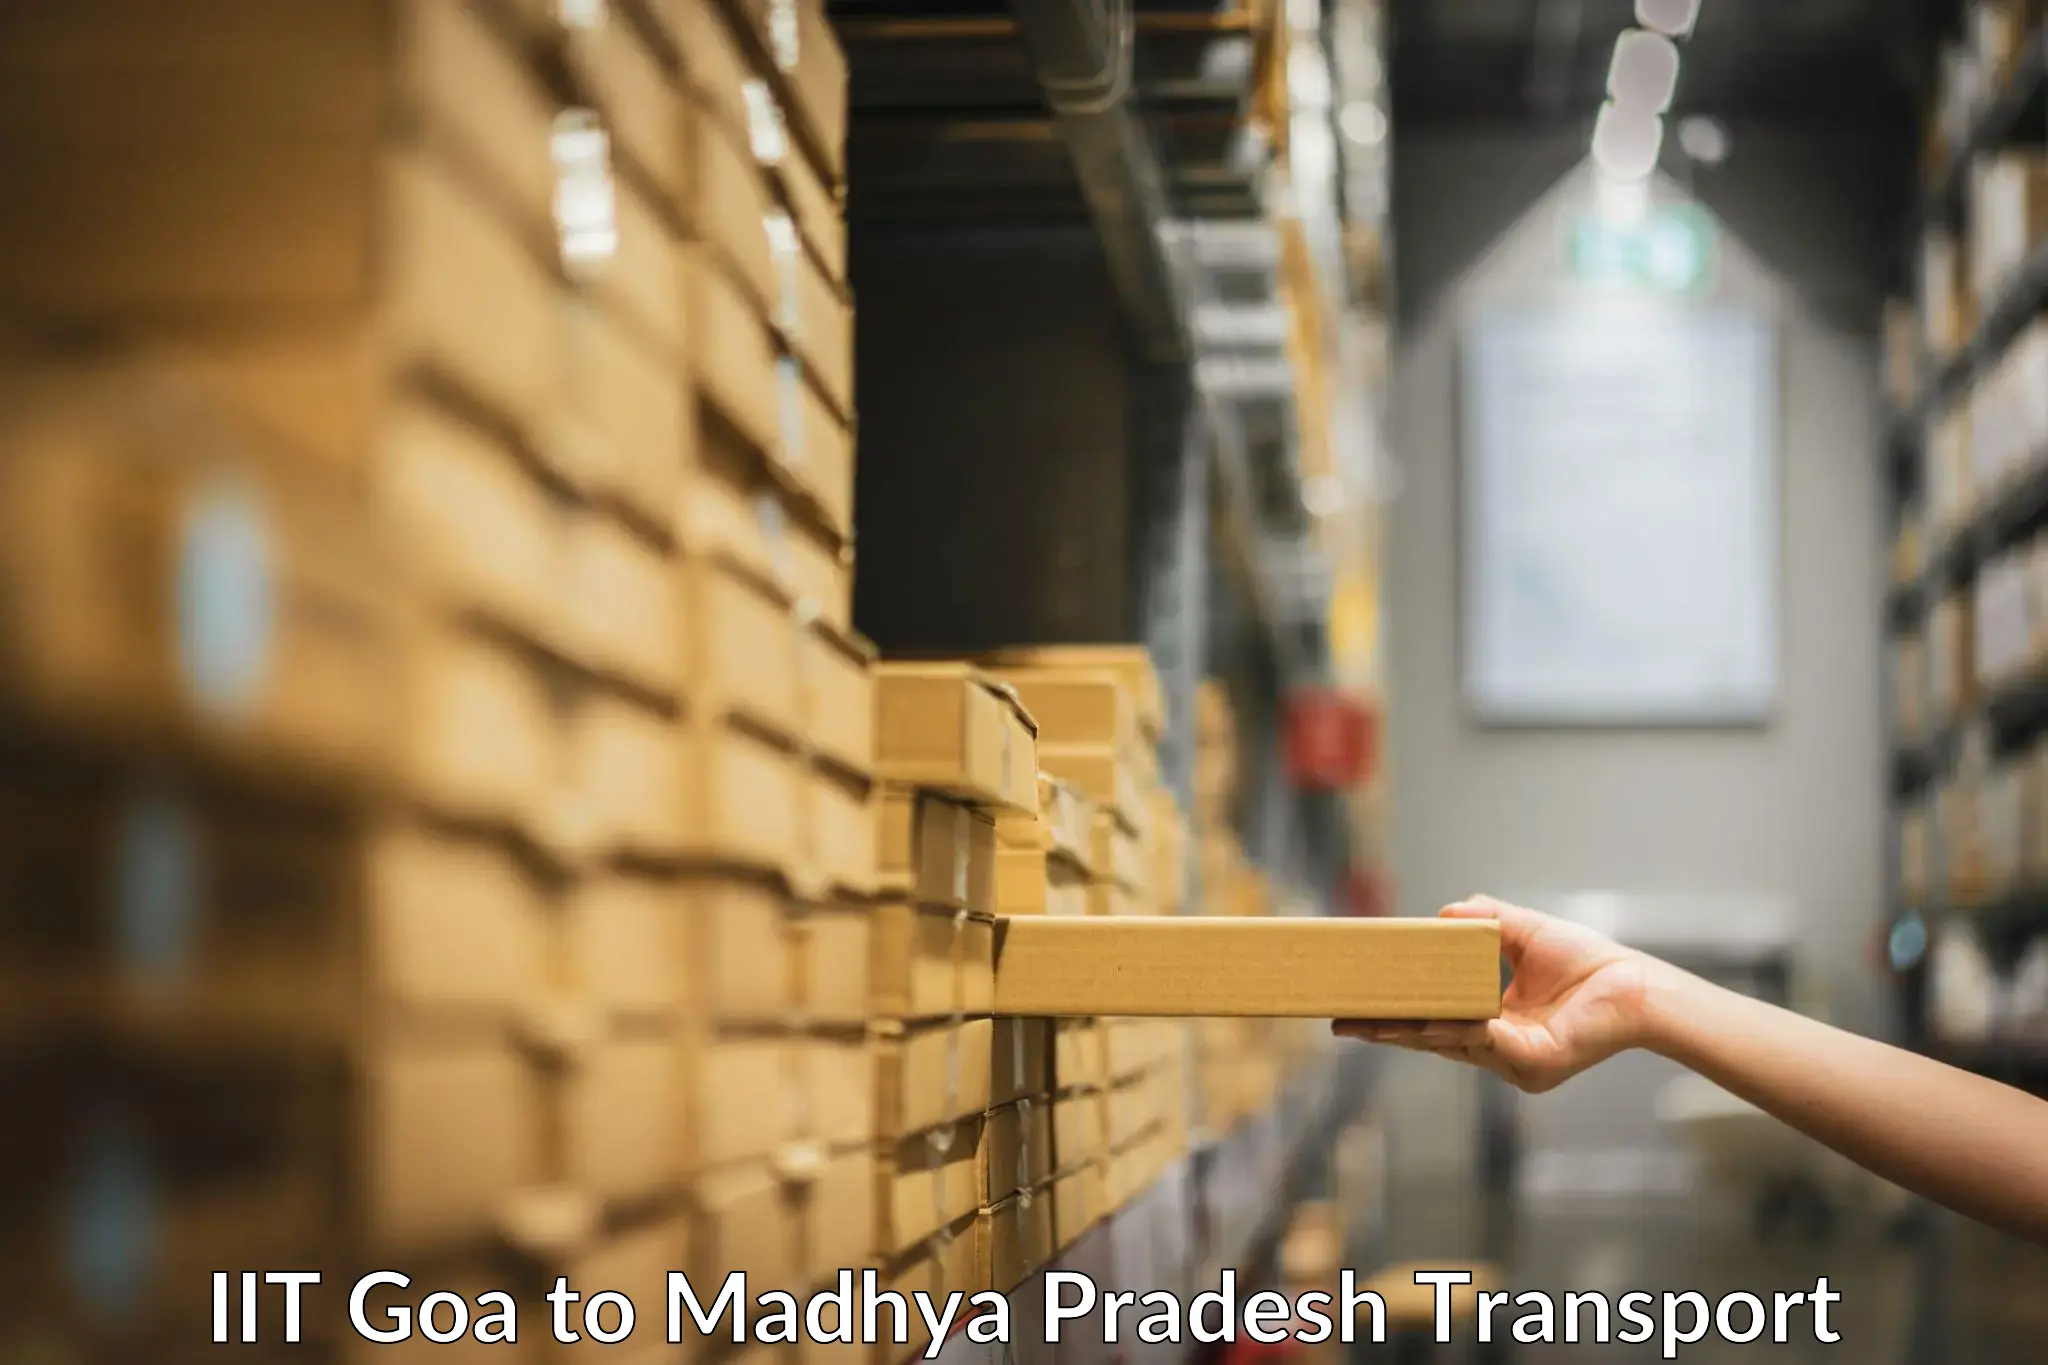 Transport services in IIT Goa to Sehore